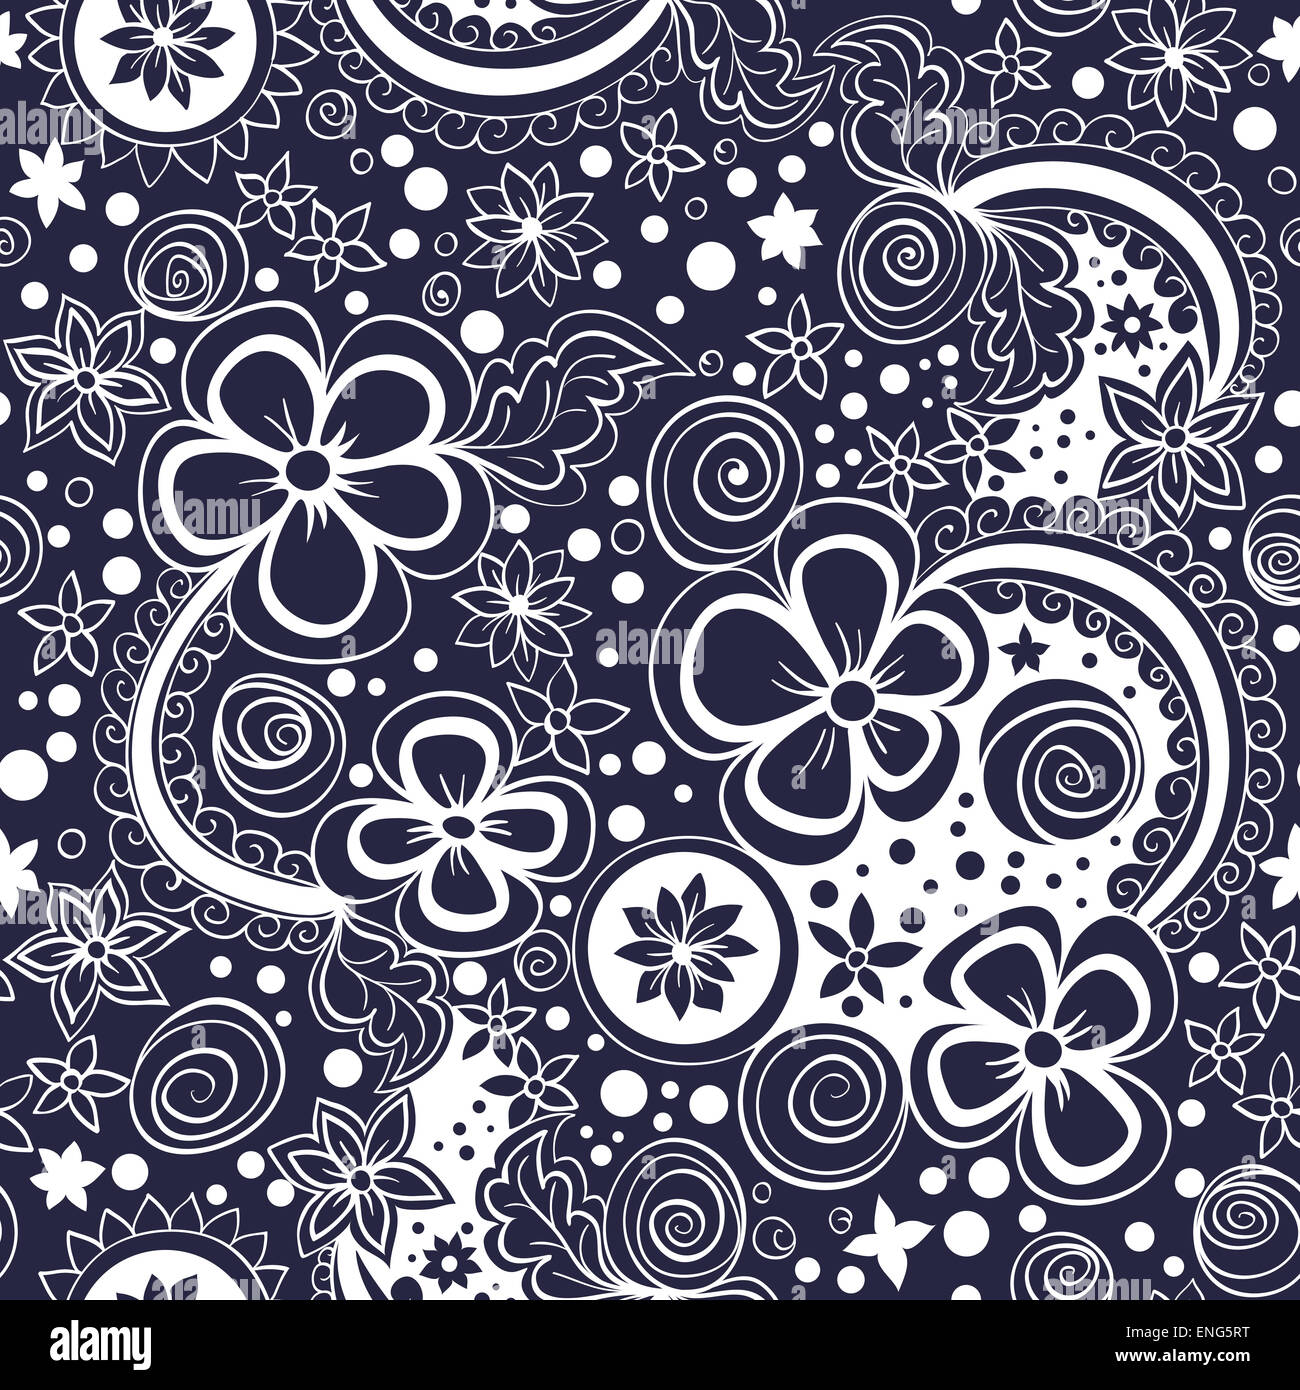 vector seamless black and white floral pattern Stock Photo